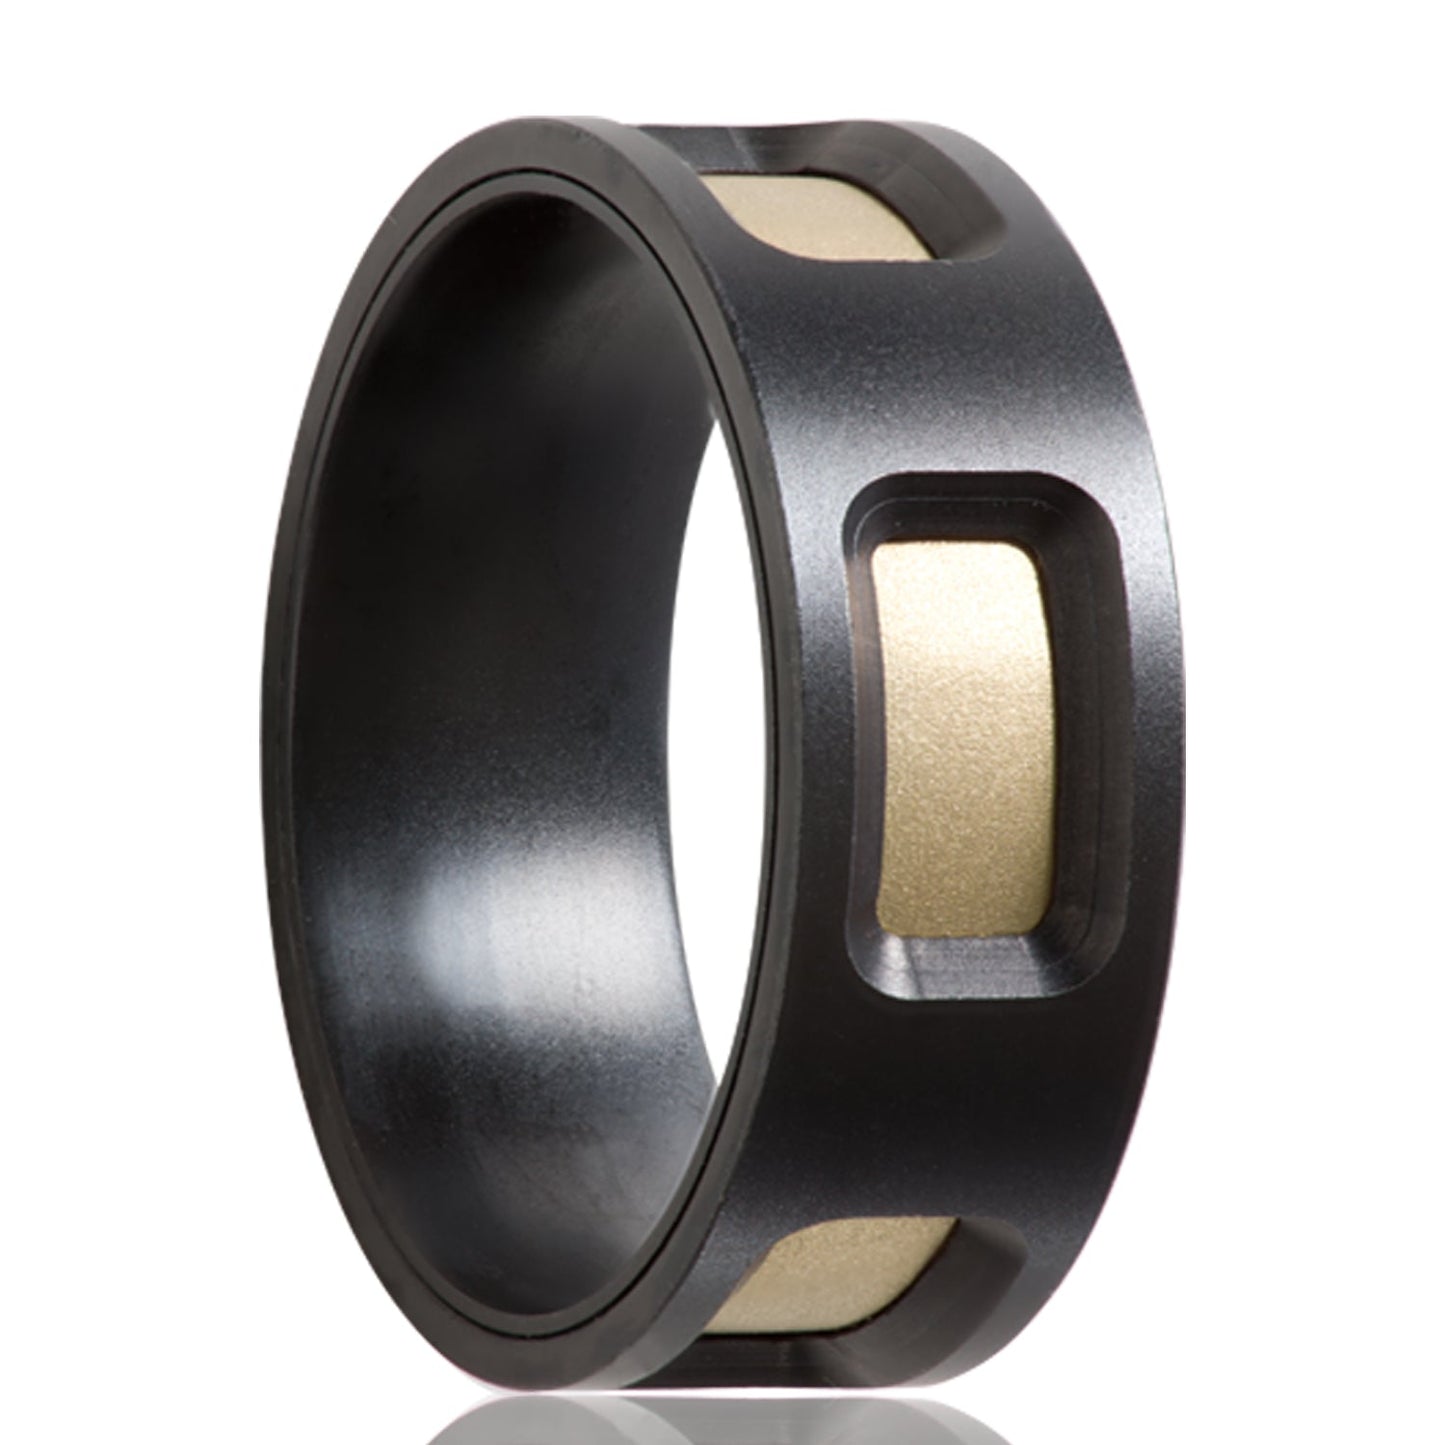 A zirconium men's men's wedding band with 14k yellow gold inlays displayed on a neutral white background.